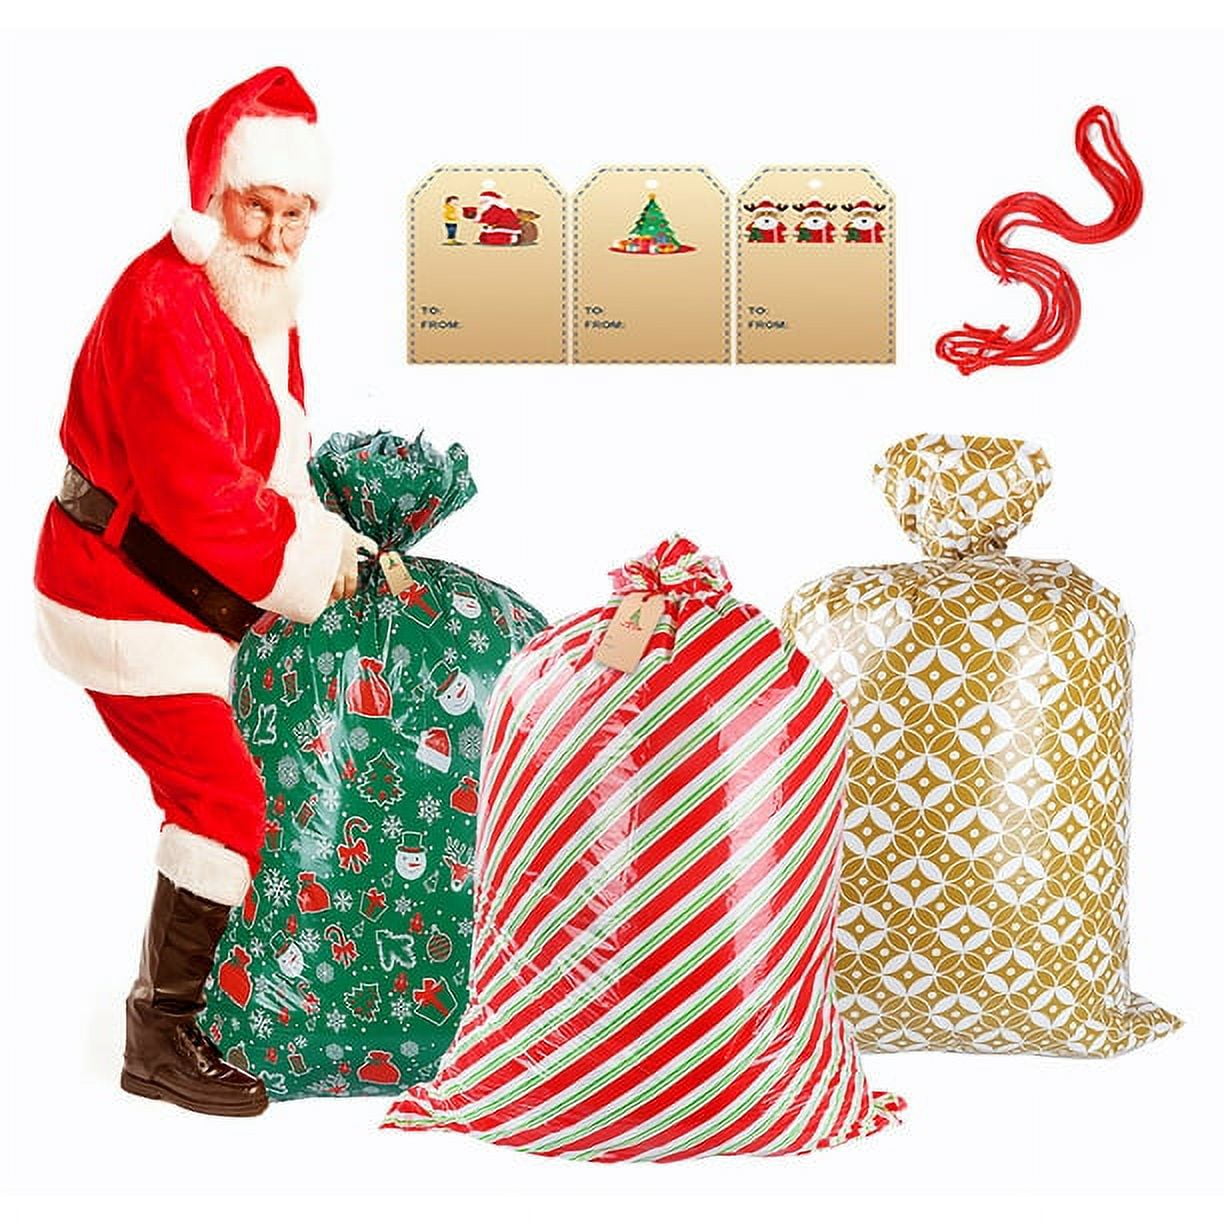 6 Pack Jumbo Christmas Gift Wrapping Bags for Oversized Holiday Present, Large  Plastic Sacks with Strings, Xmas Gingerbread Man, 36 x 48 in